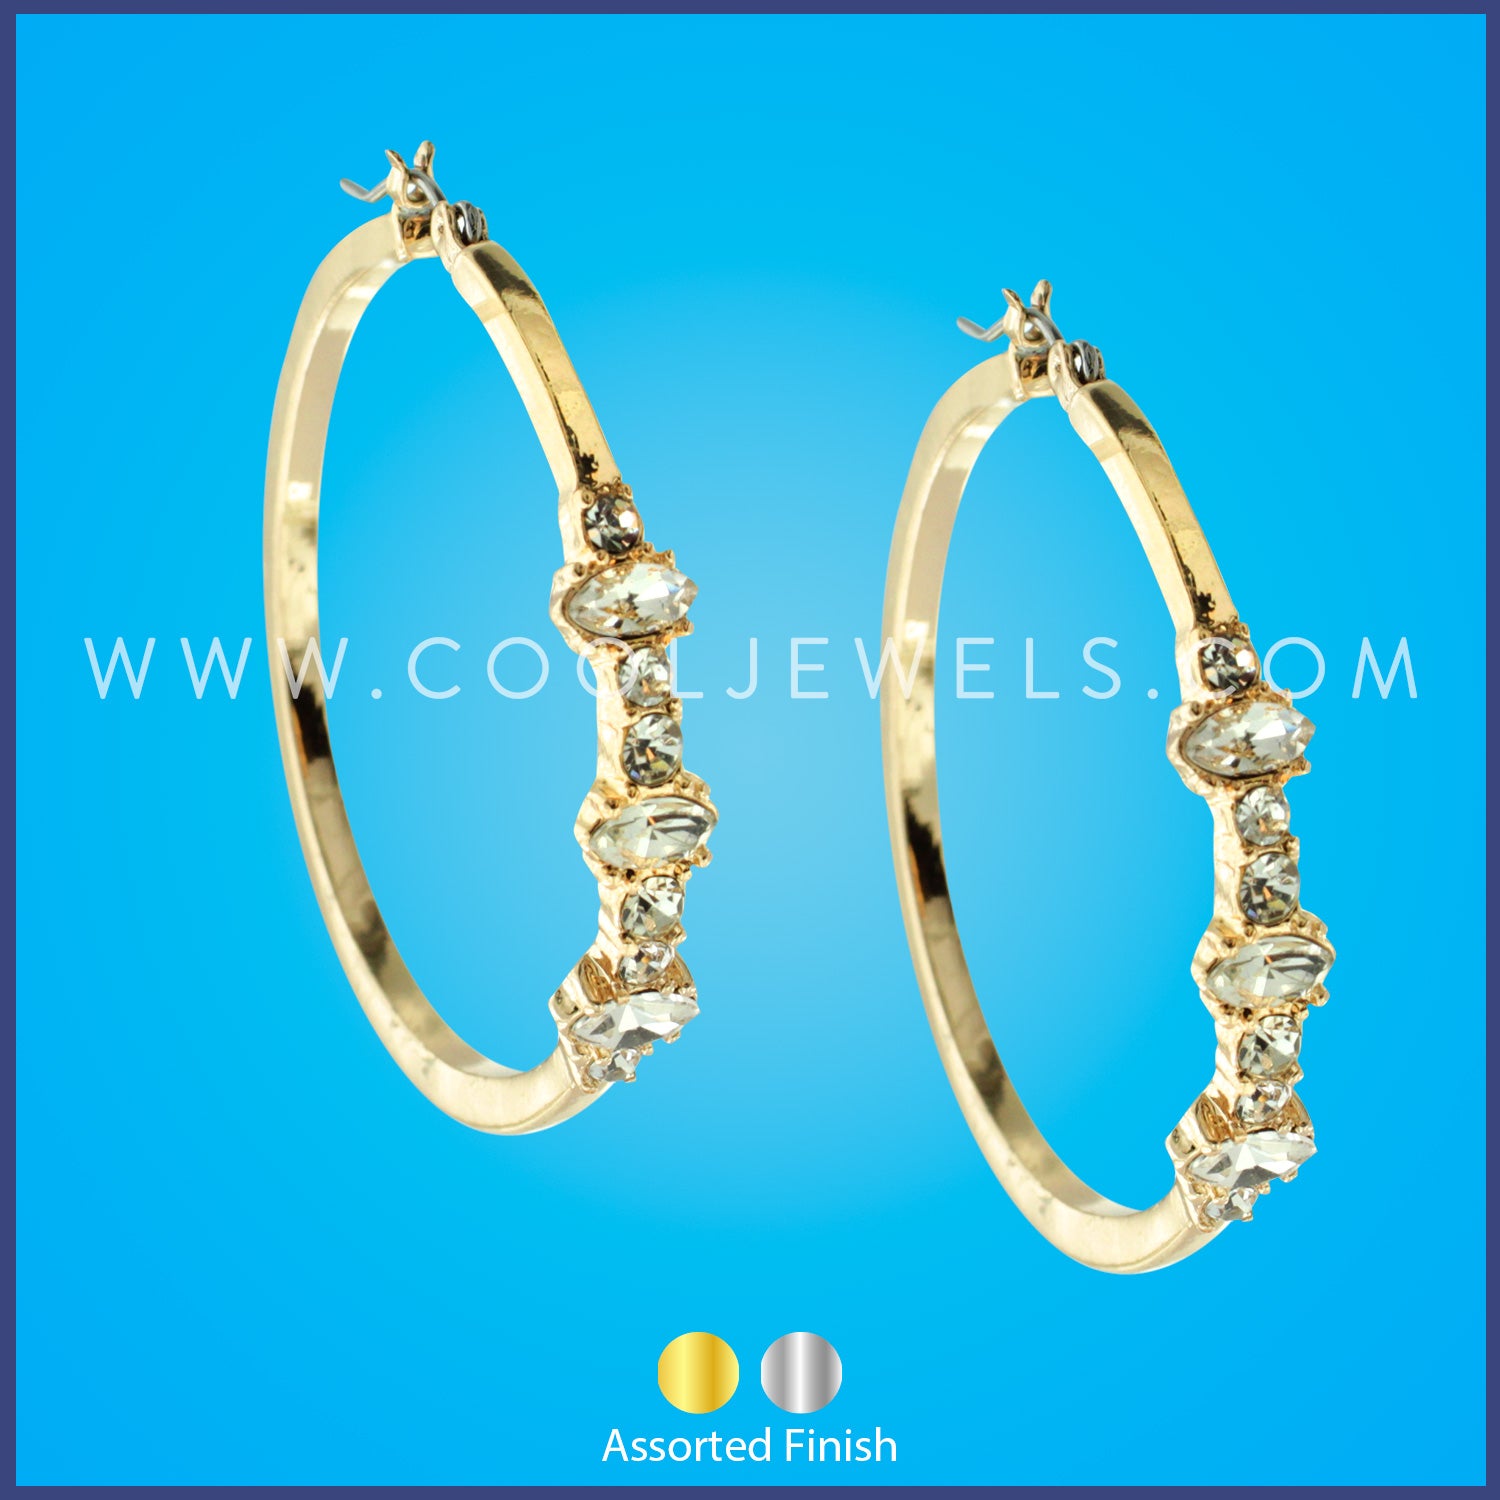 HOOP EARRINGS WITH GLASS STONES - ASSORTED